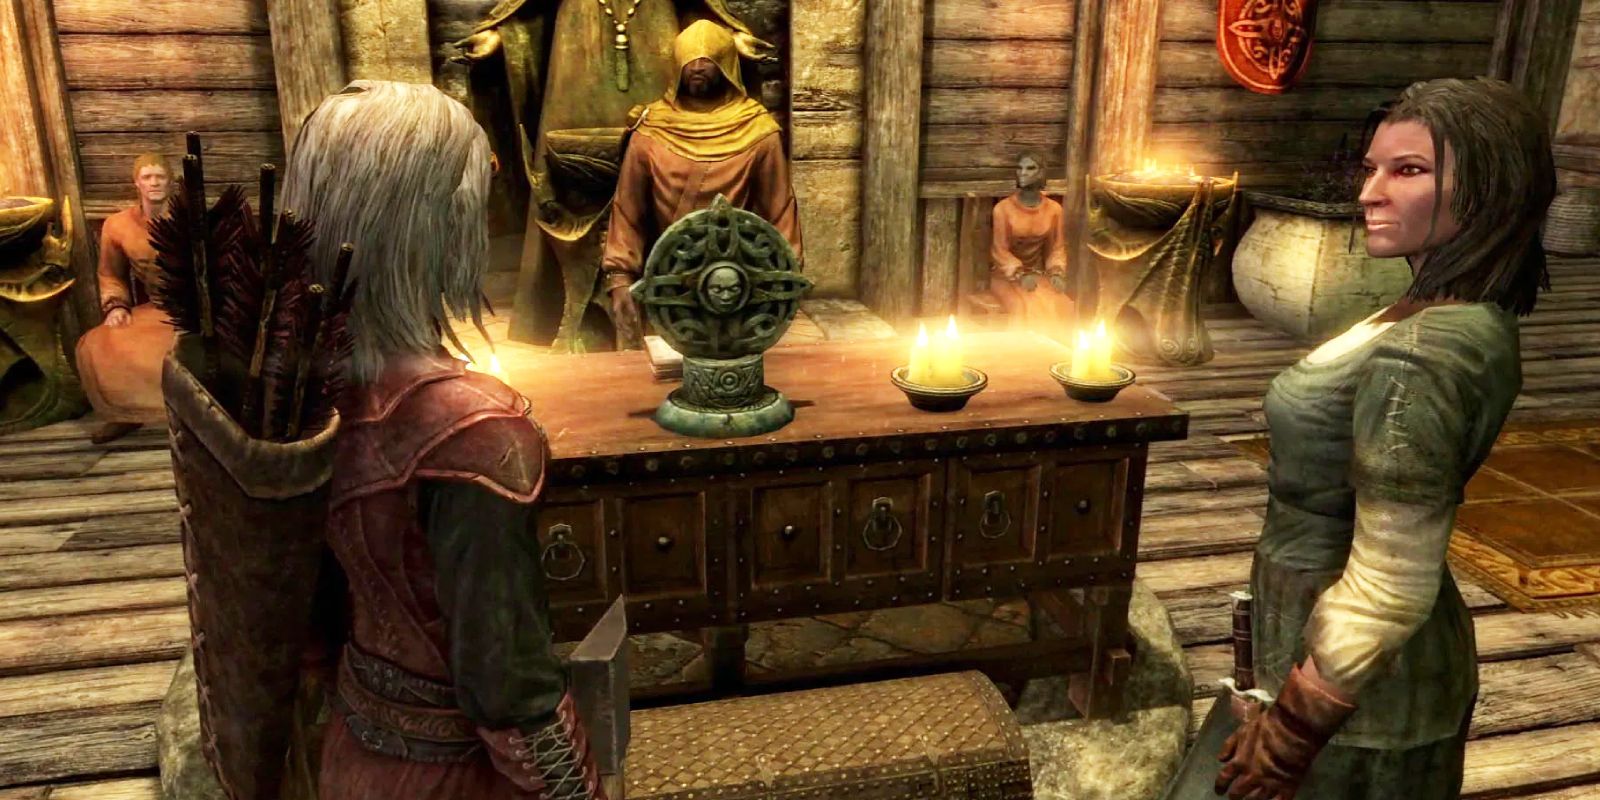 Skyrim Or AC Valhalla: Which Has The Better Romance Options?